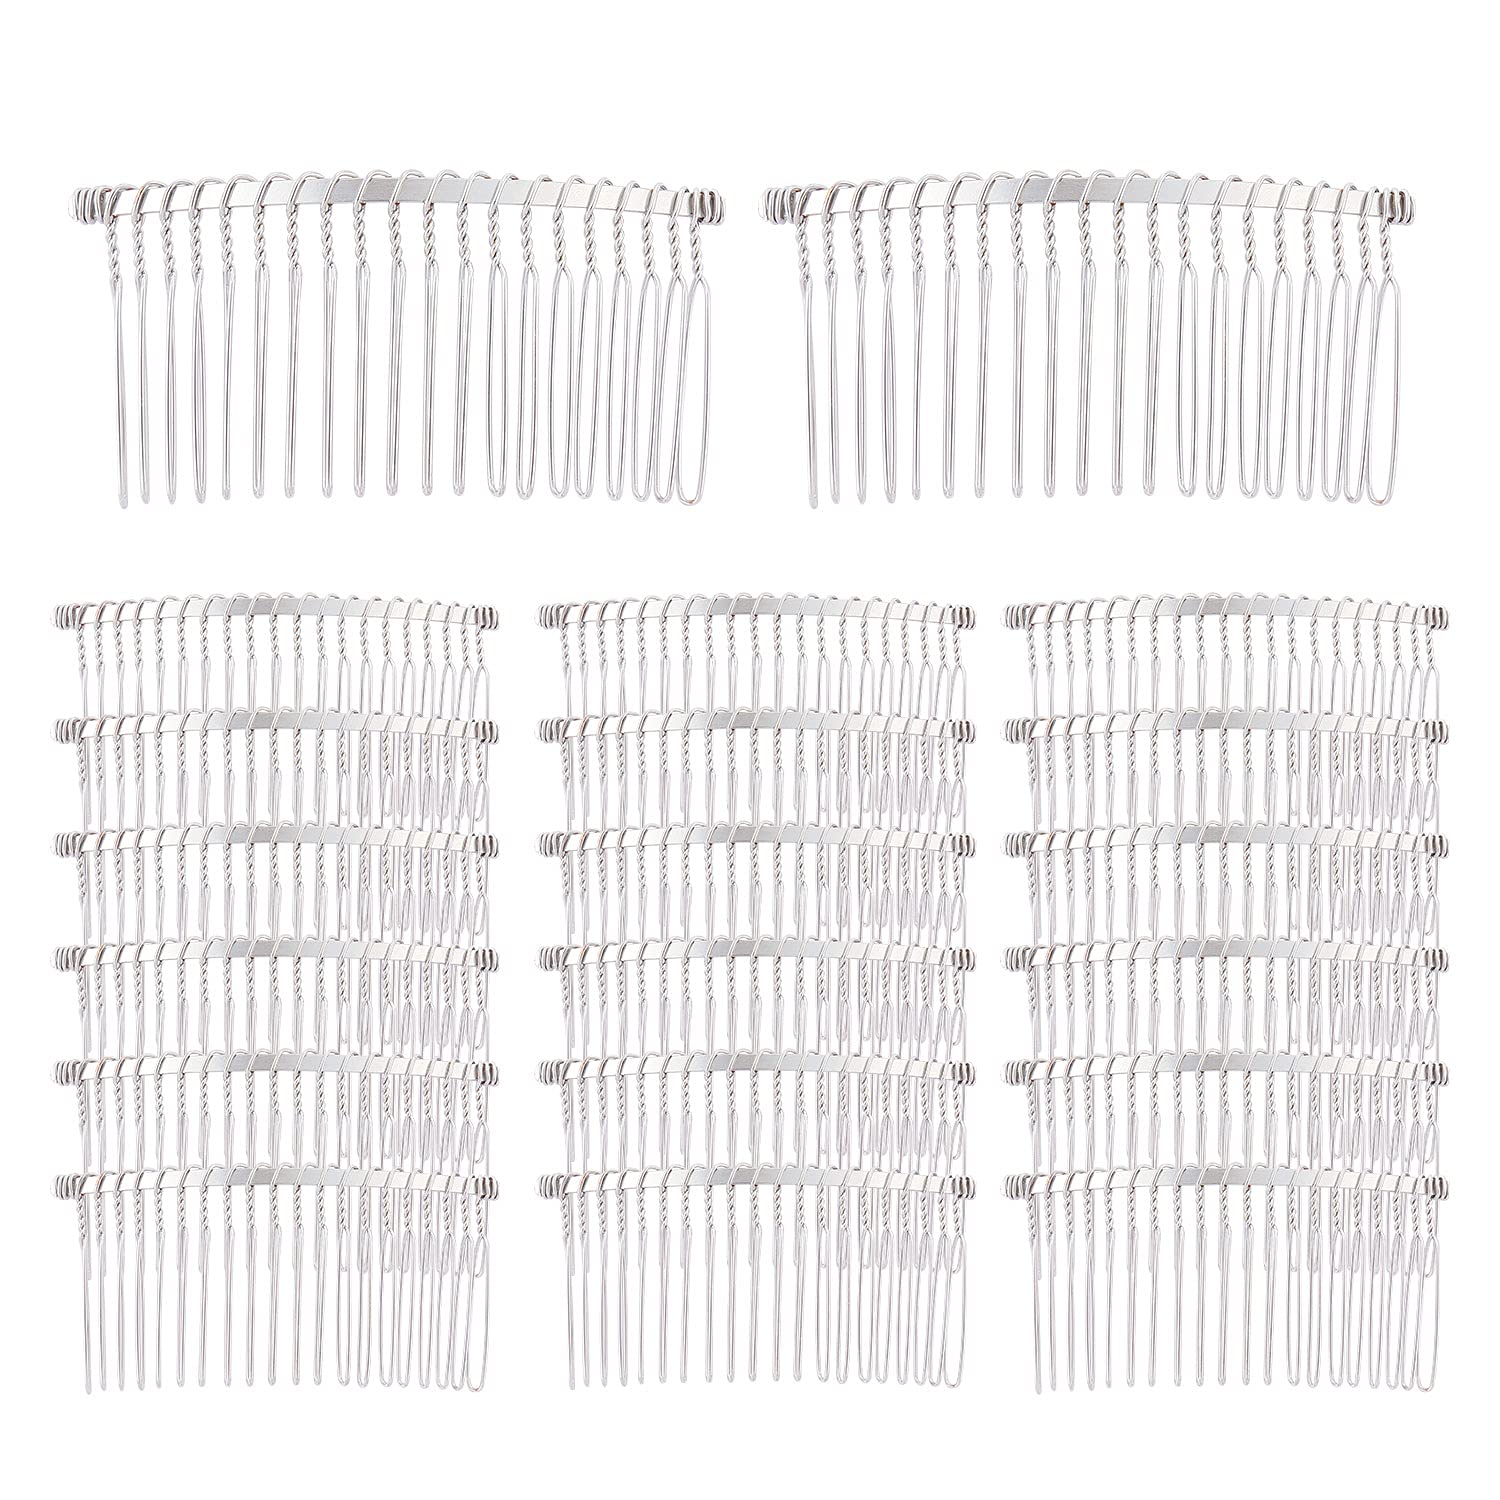 5 Pieces Hair Combs for Women Accessories Metal Bridal Hair Comb 20 Teeth  Wedding Veil Comb Decorative for Women Girls Fine Hair(White K) 